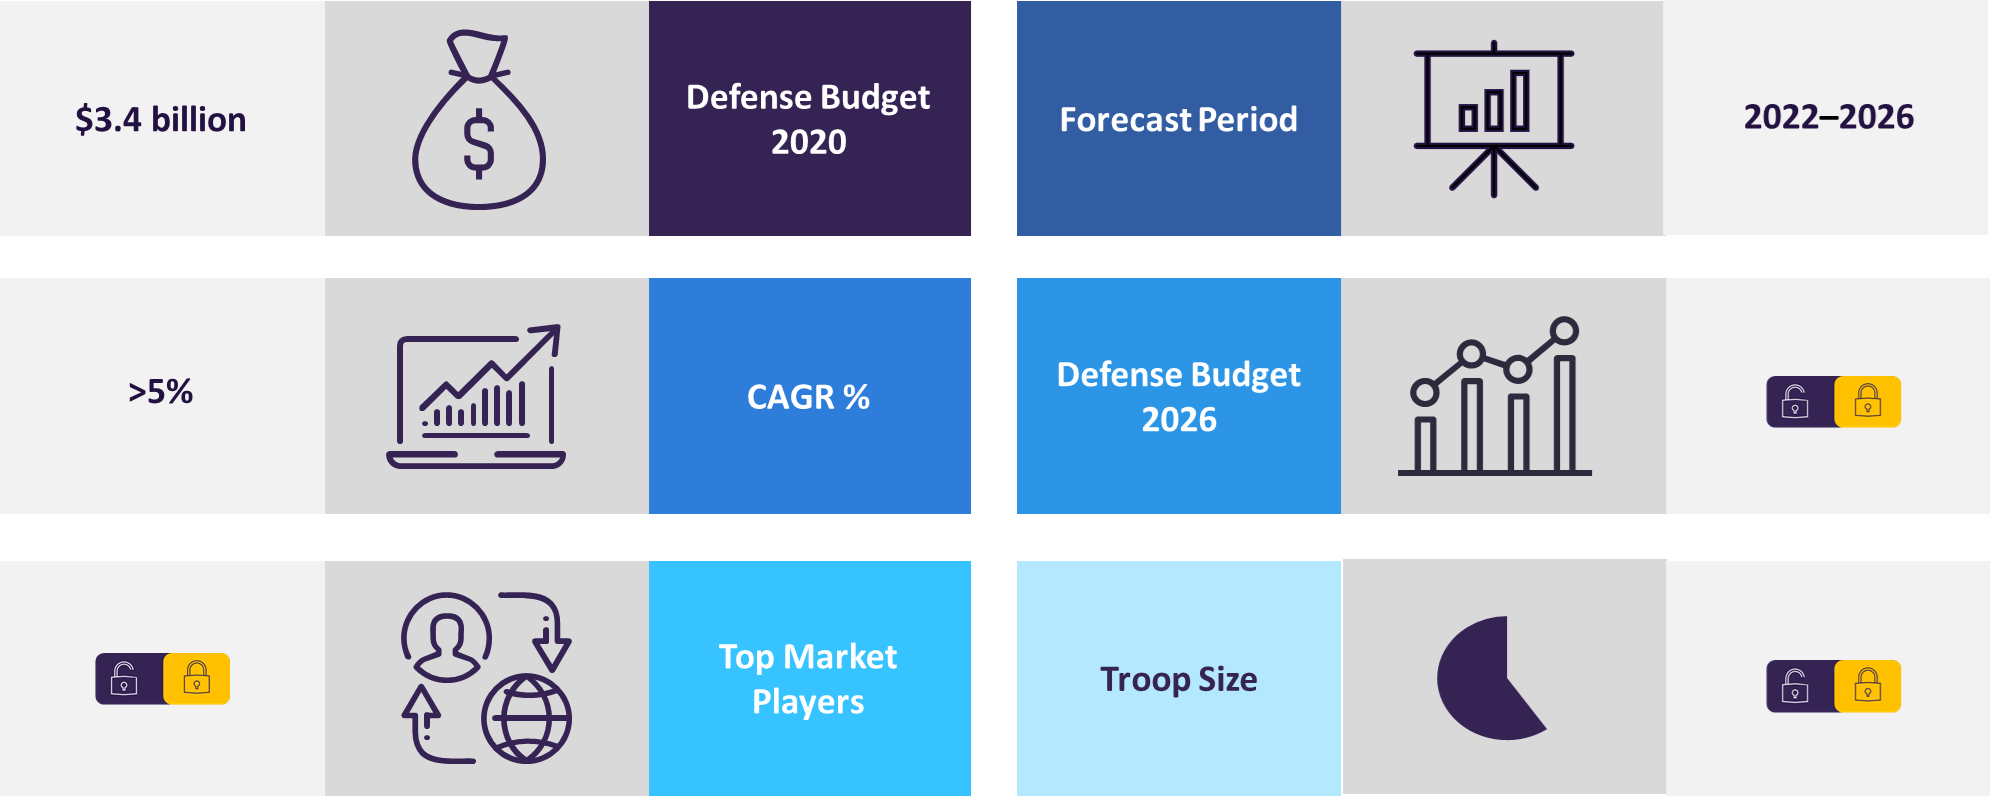 Overview of the defense market in Malaysia